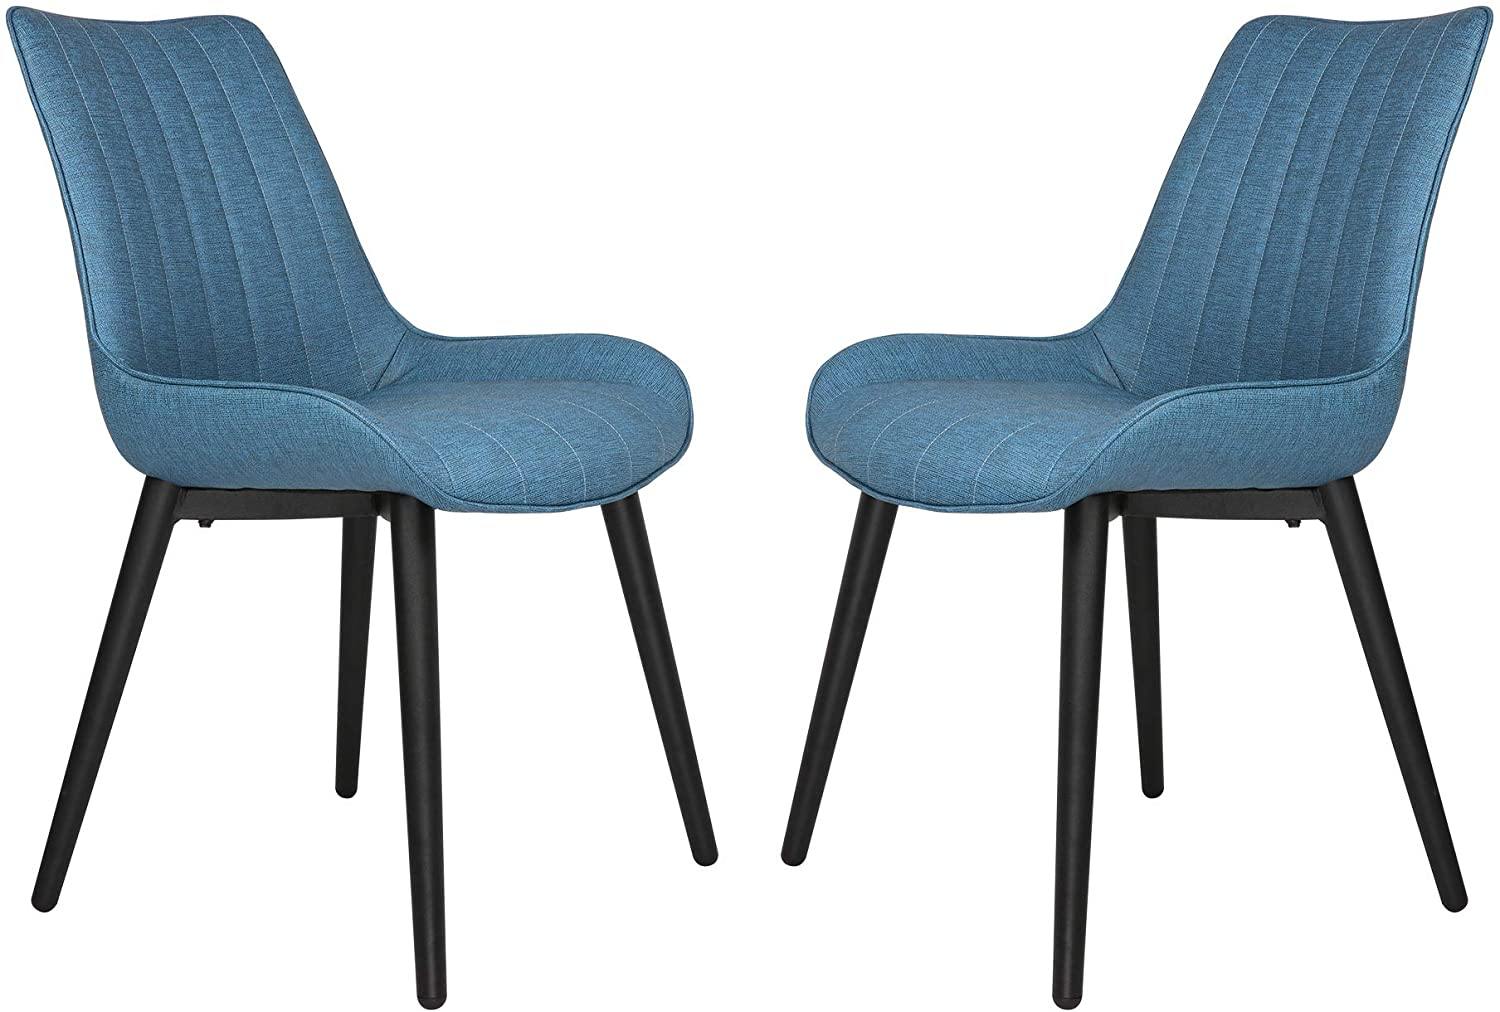 Modern Dining Chairs Set of 2 with Upholstered Seat and Back, Water Resistance and Easy to Clean, Durable Office Chair - Bosonshop